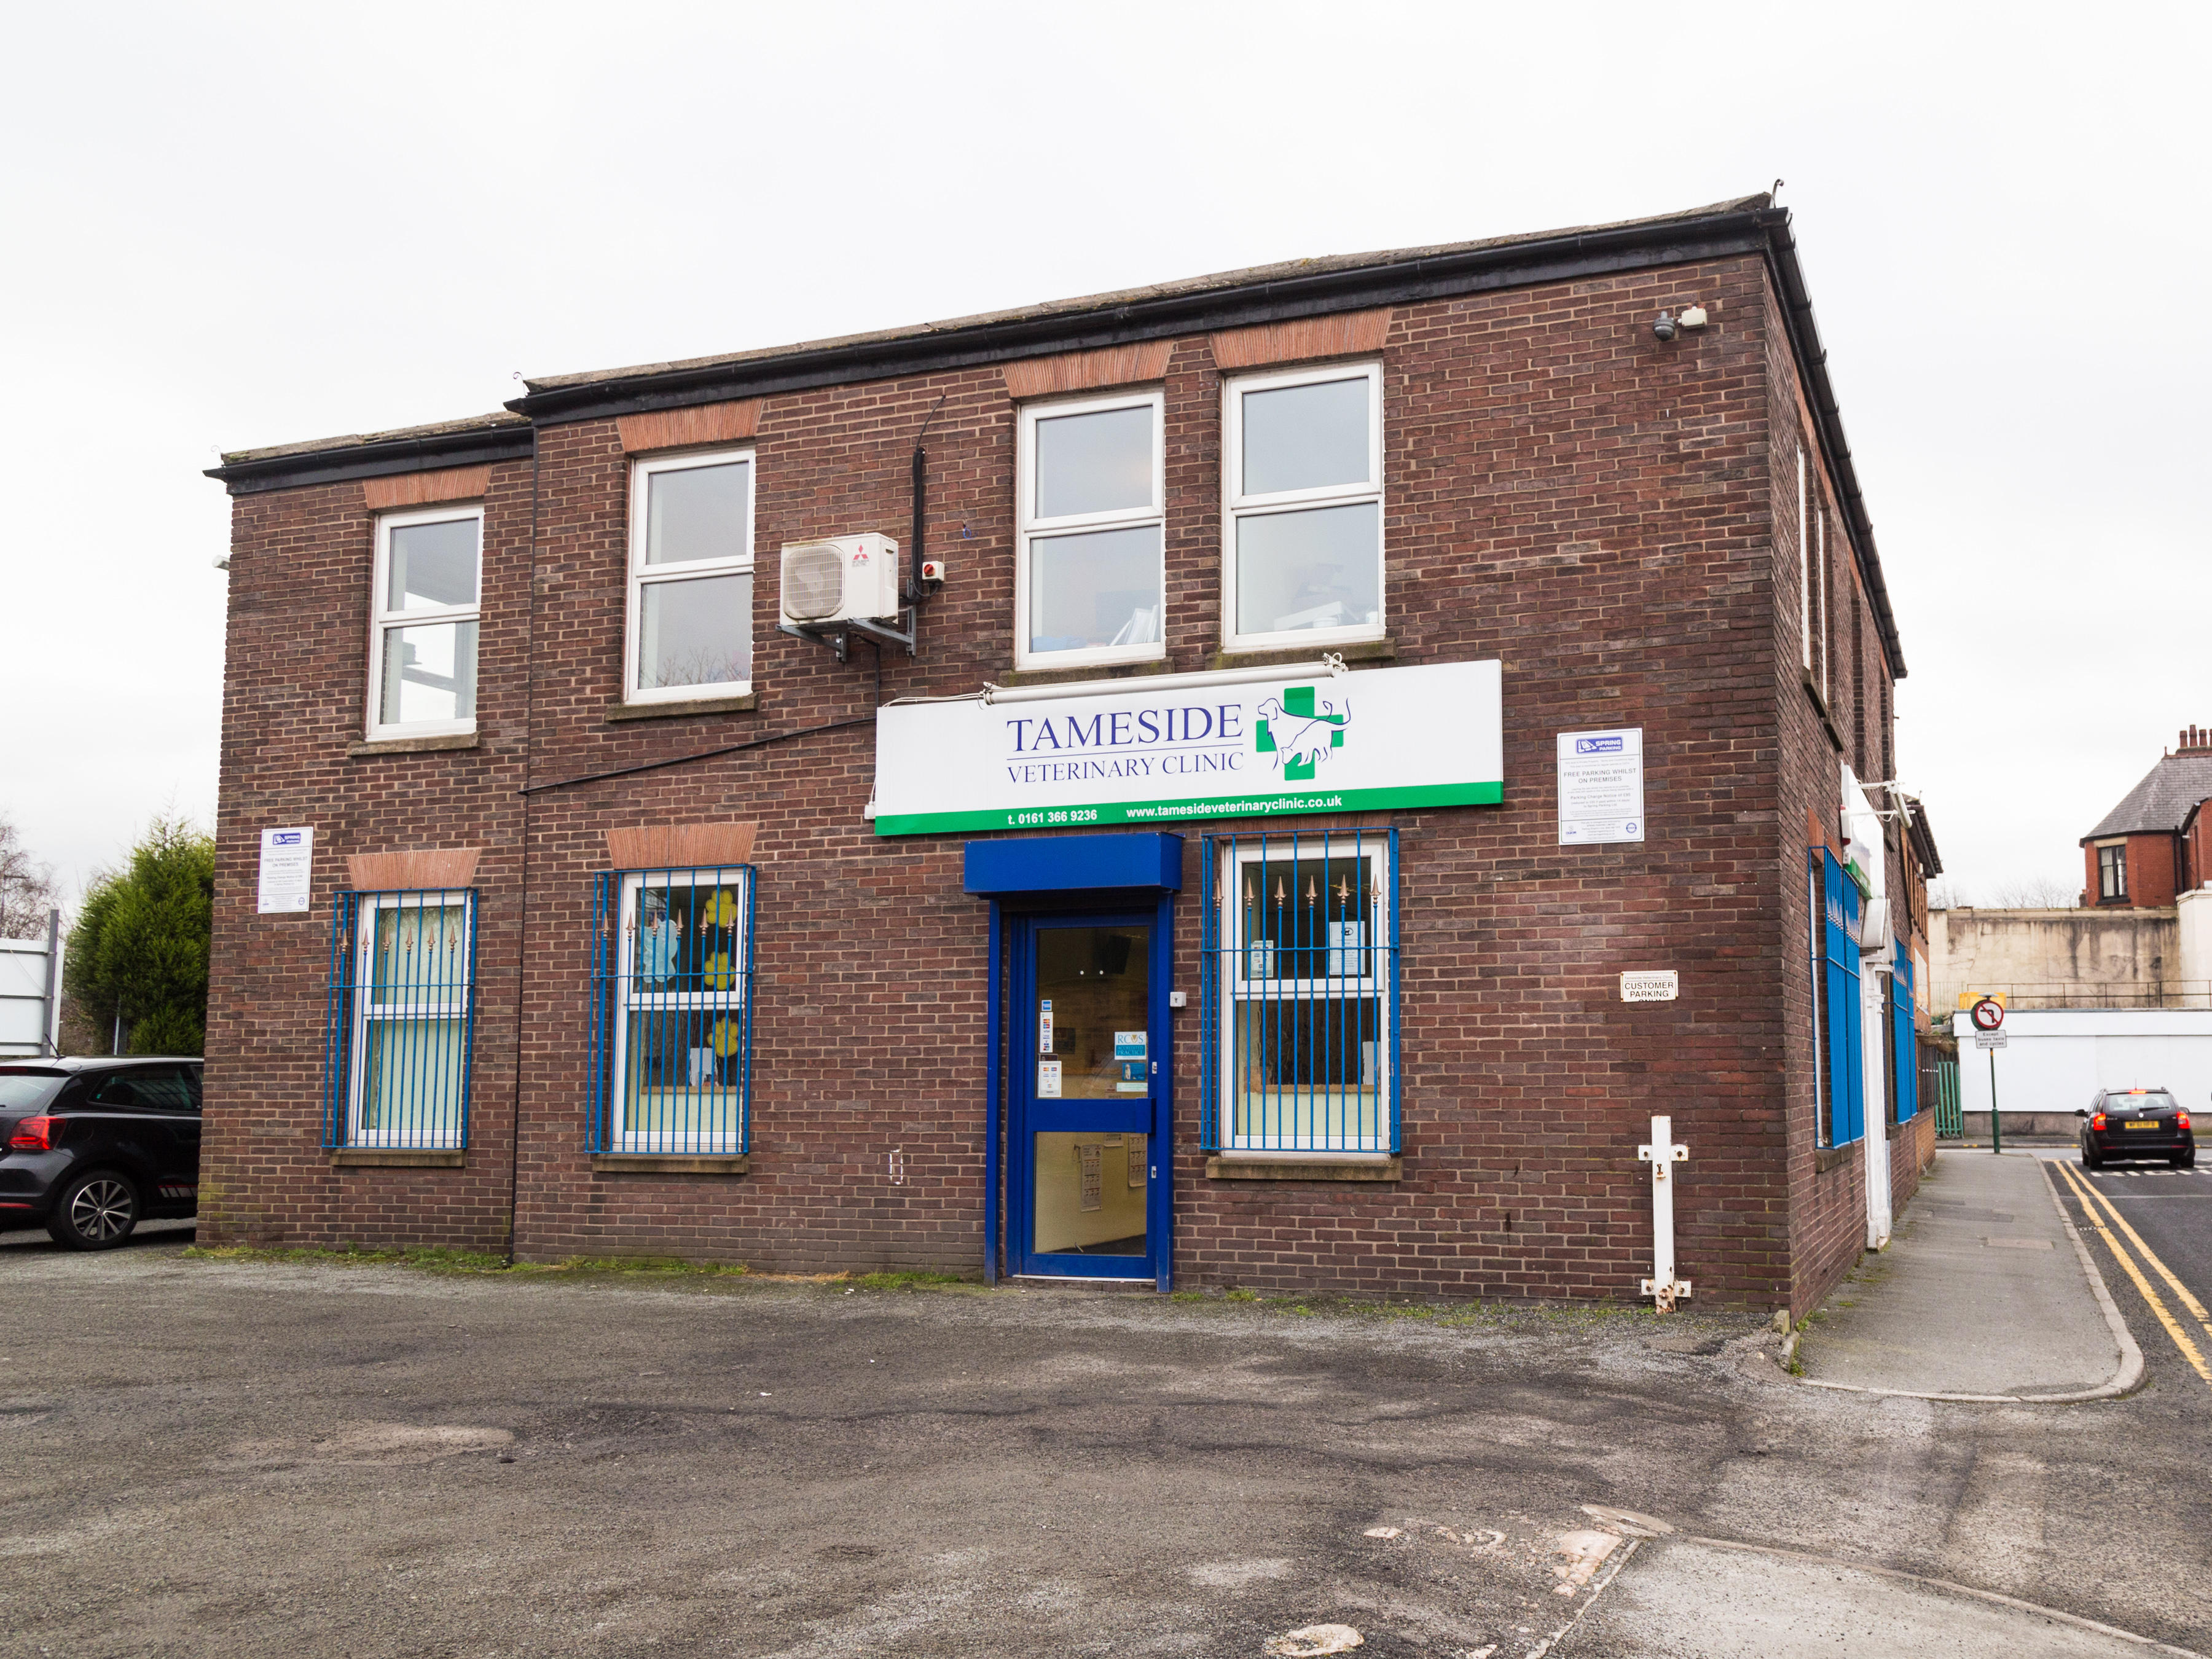 Images Tameside Veterinary Clinic, Hyde